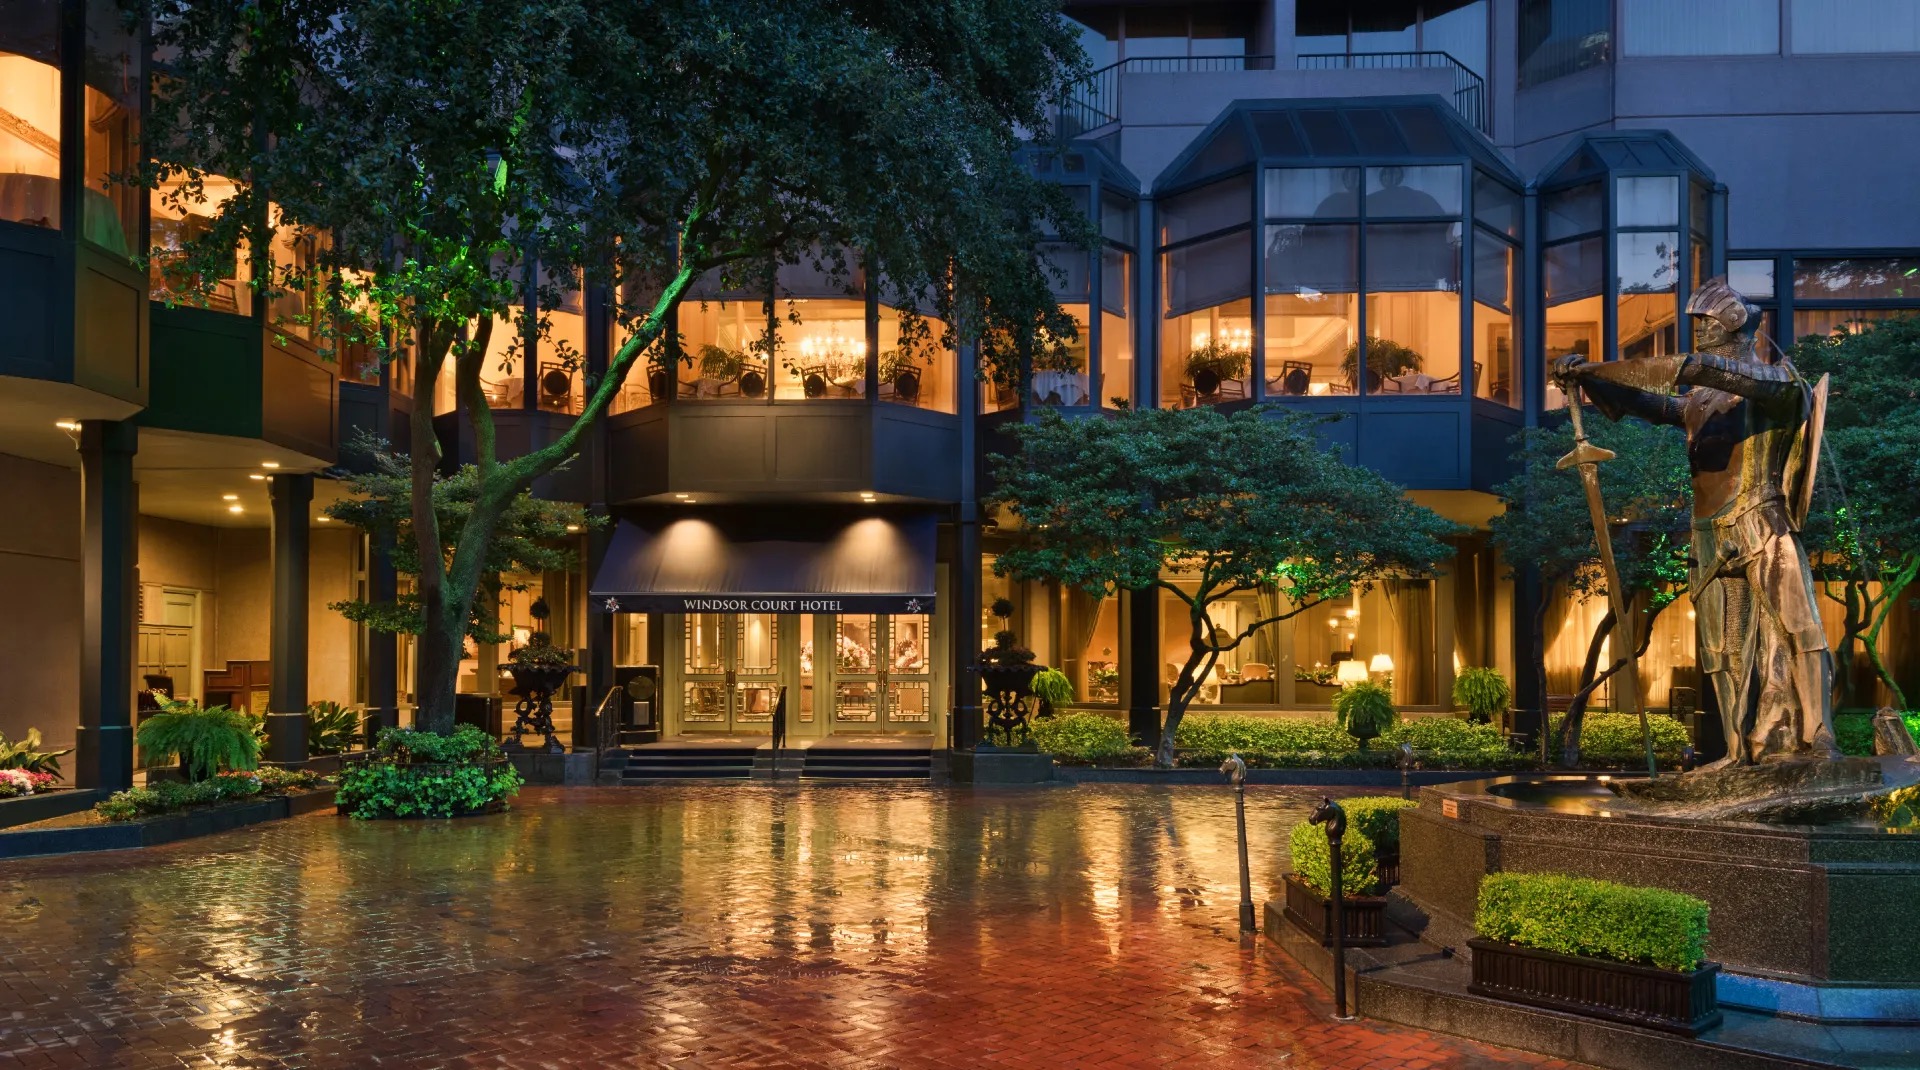 Beautiful new orleans courtyard - The Windsor Court Hotel in New Orleans